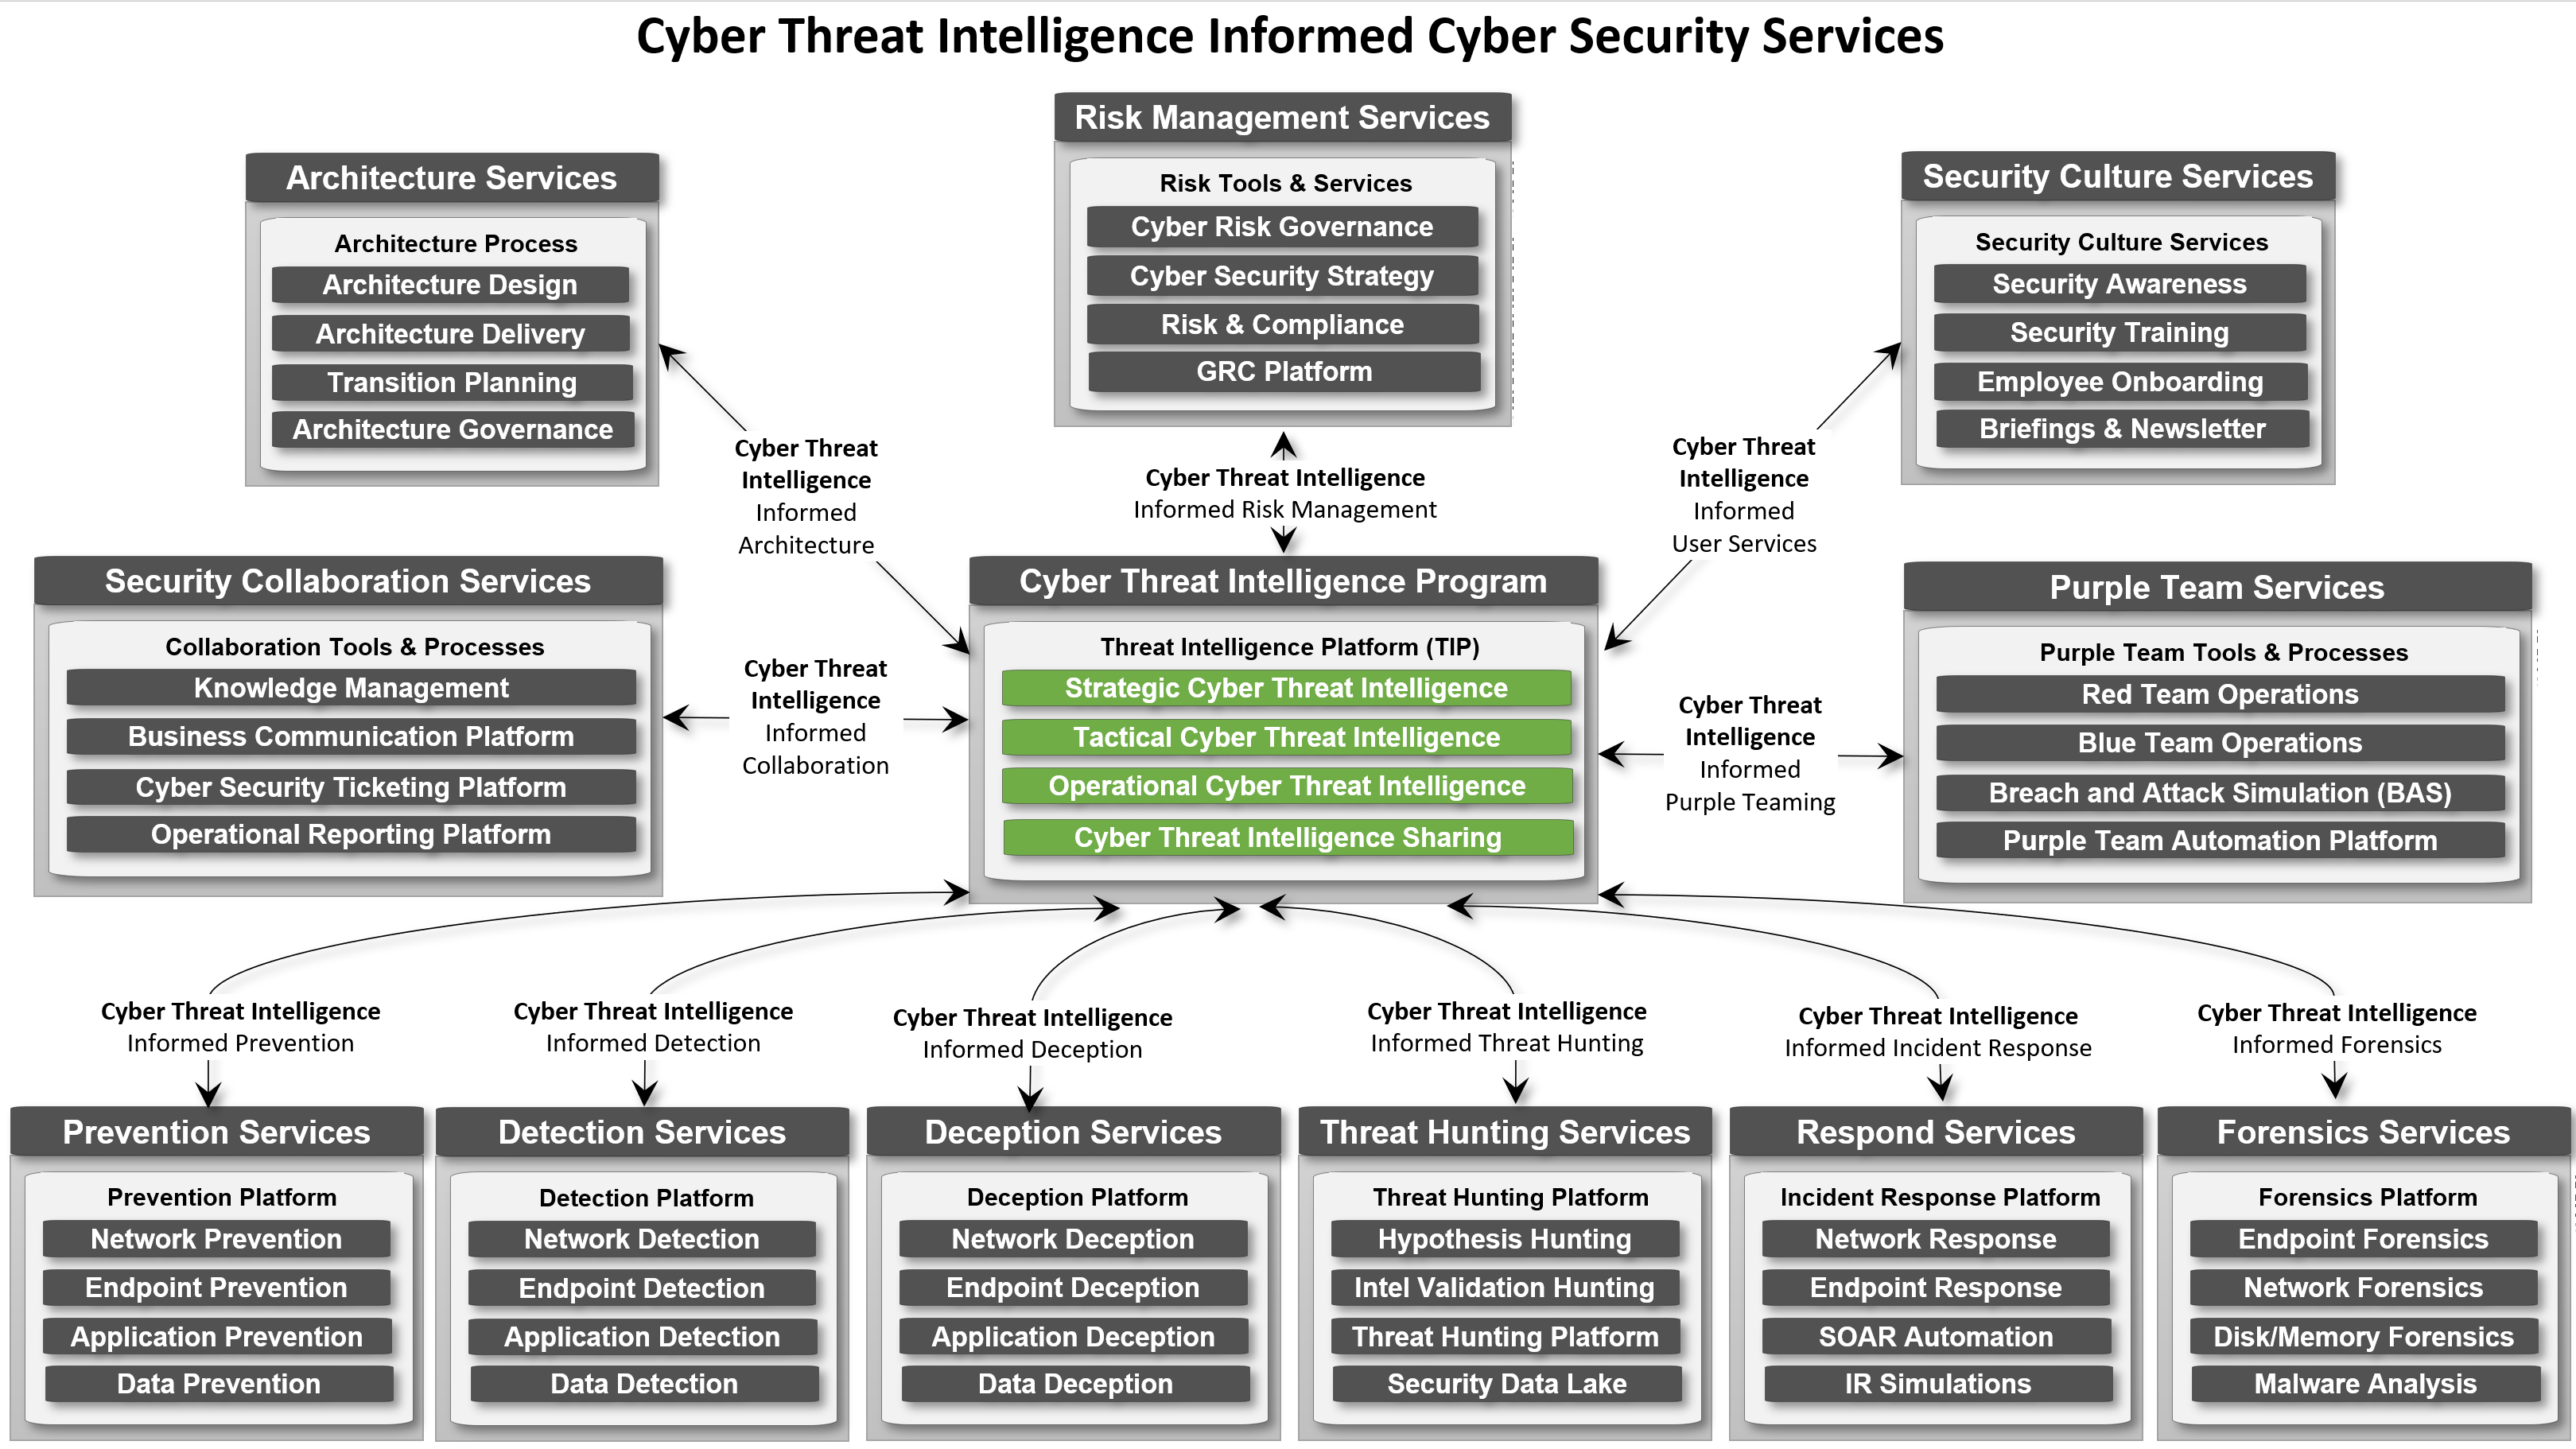 Cyber Threat Intelligence Program-Informed Services Overview